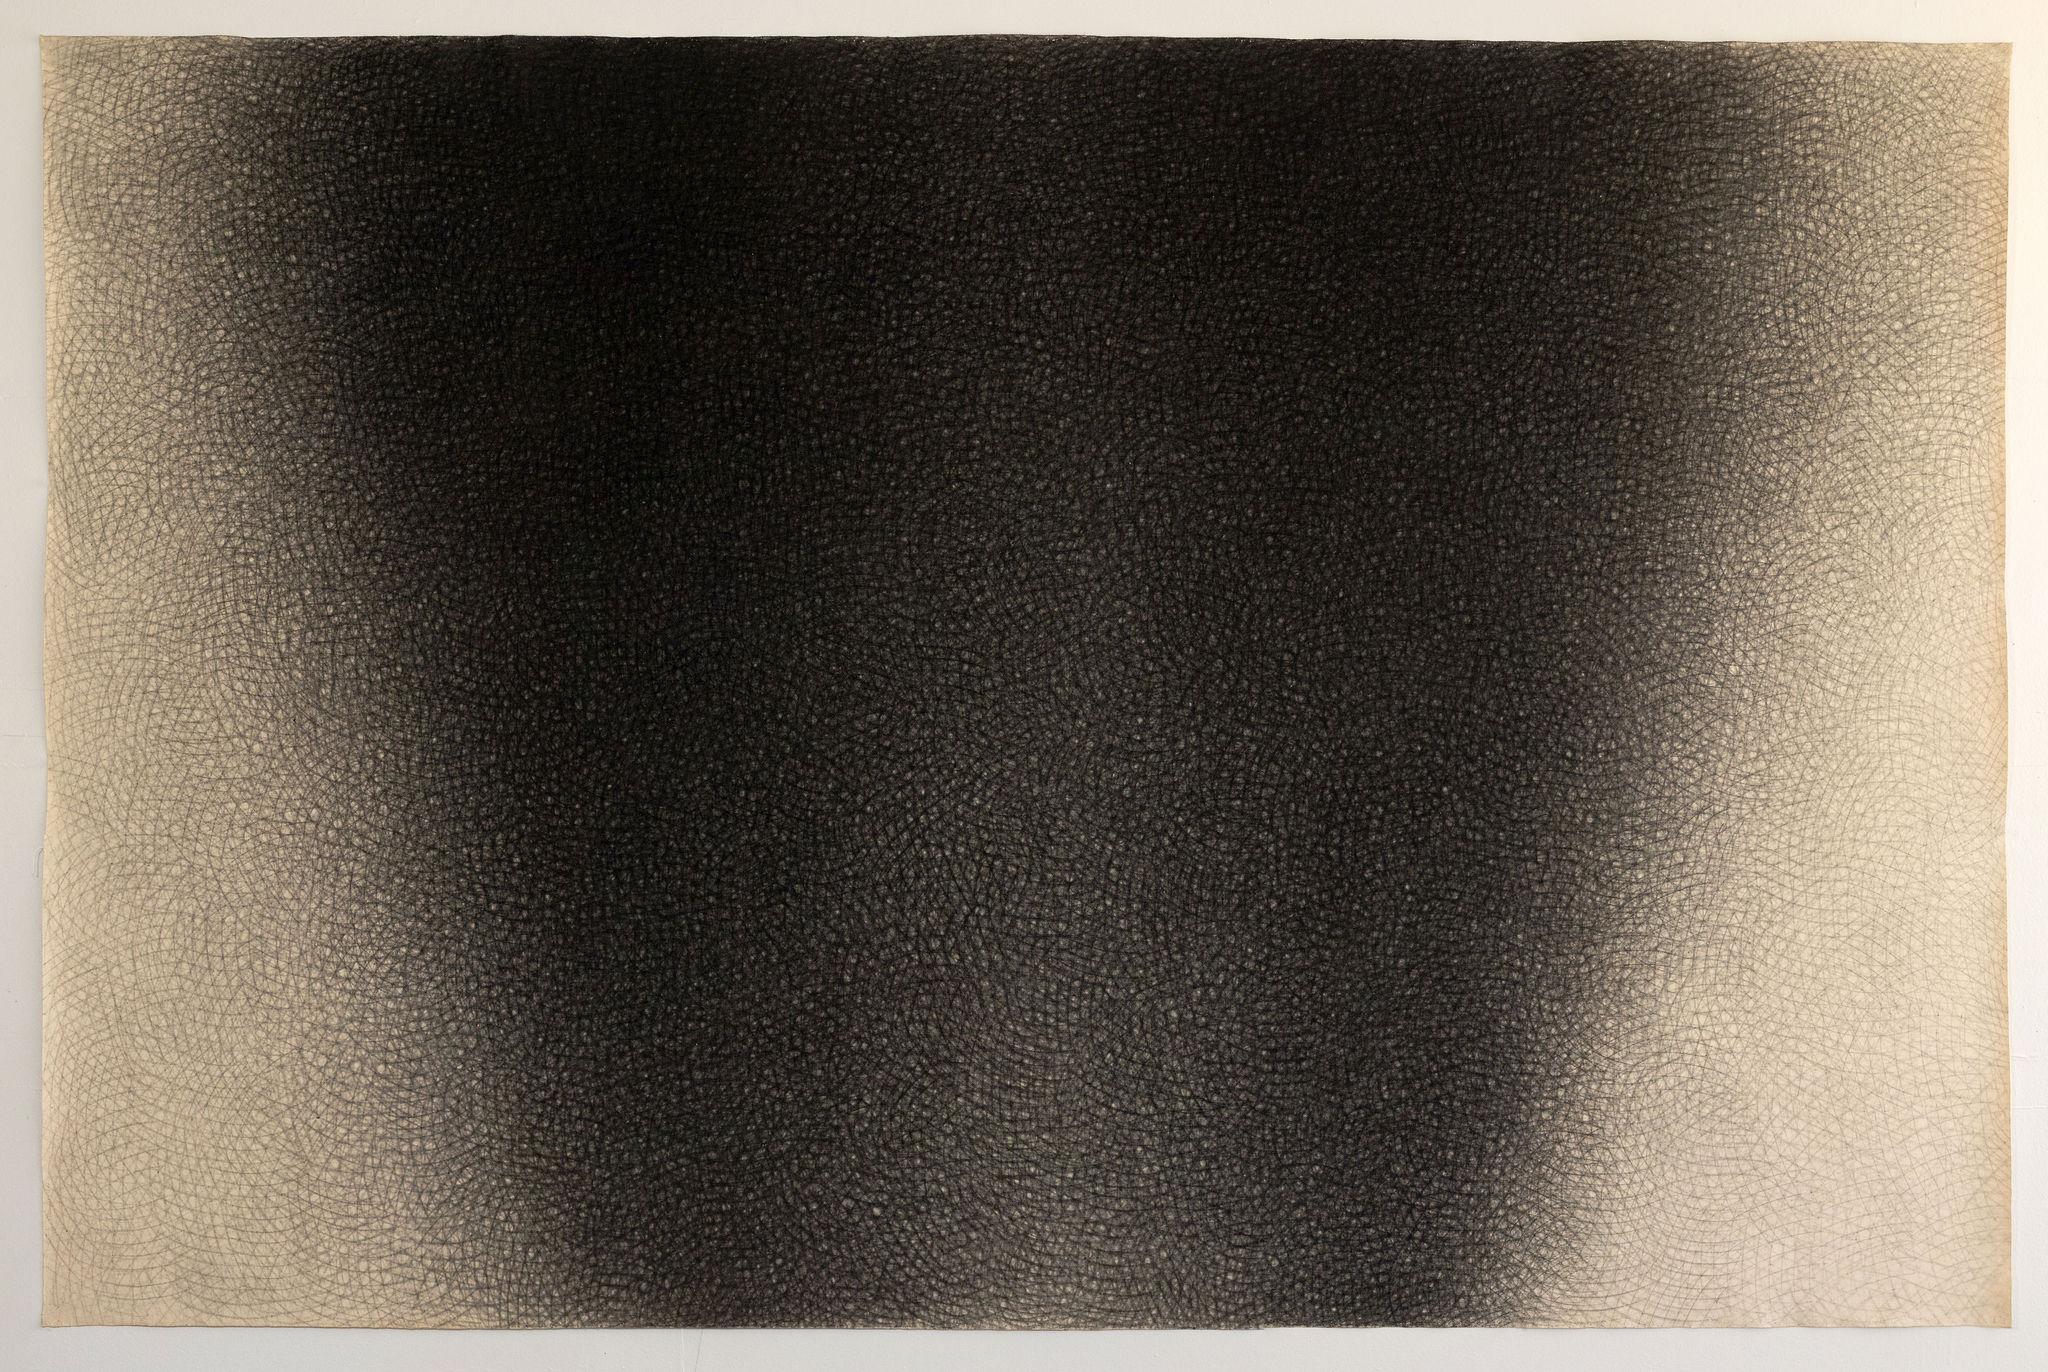 "Black Drawing (Introductions)" Charcoal Cross-Hatch Drawing on Canvas 1976 